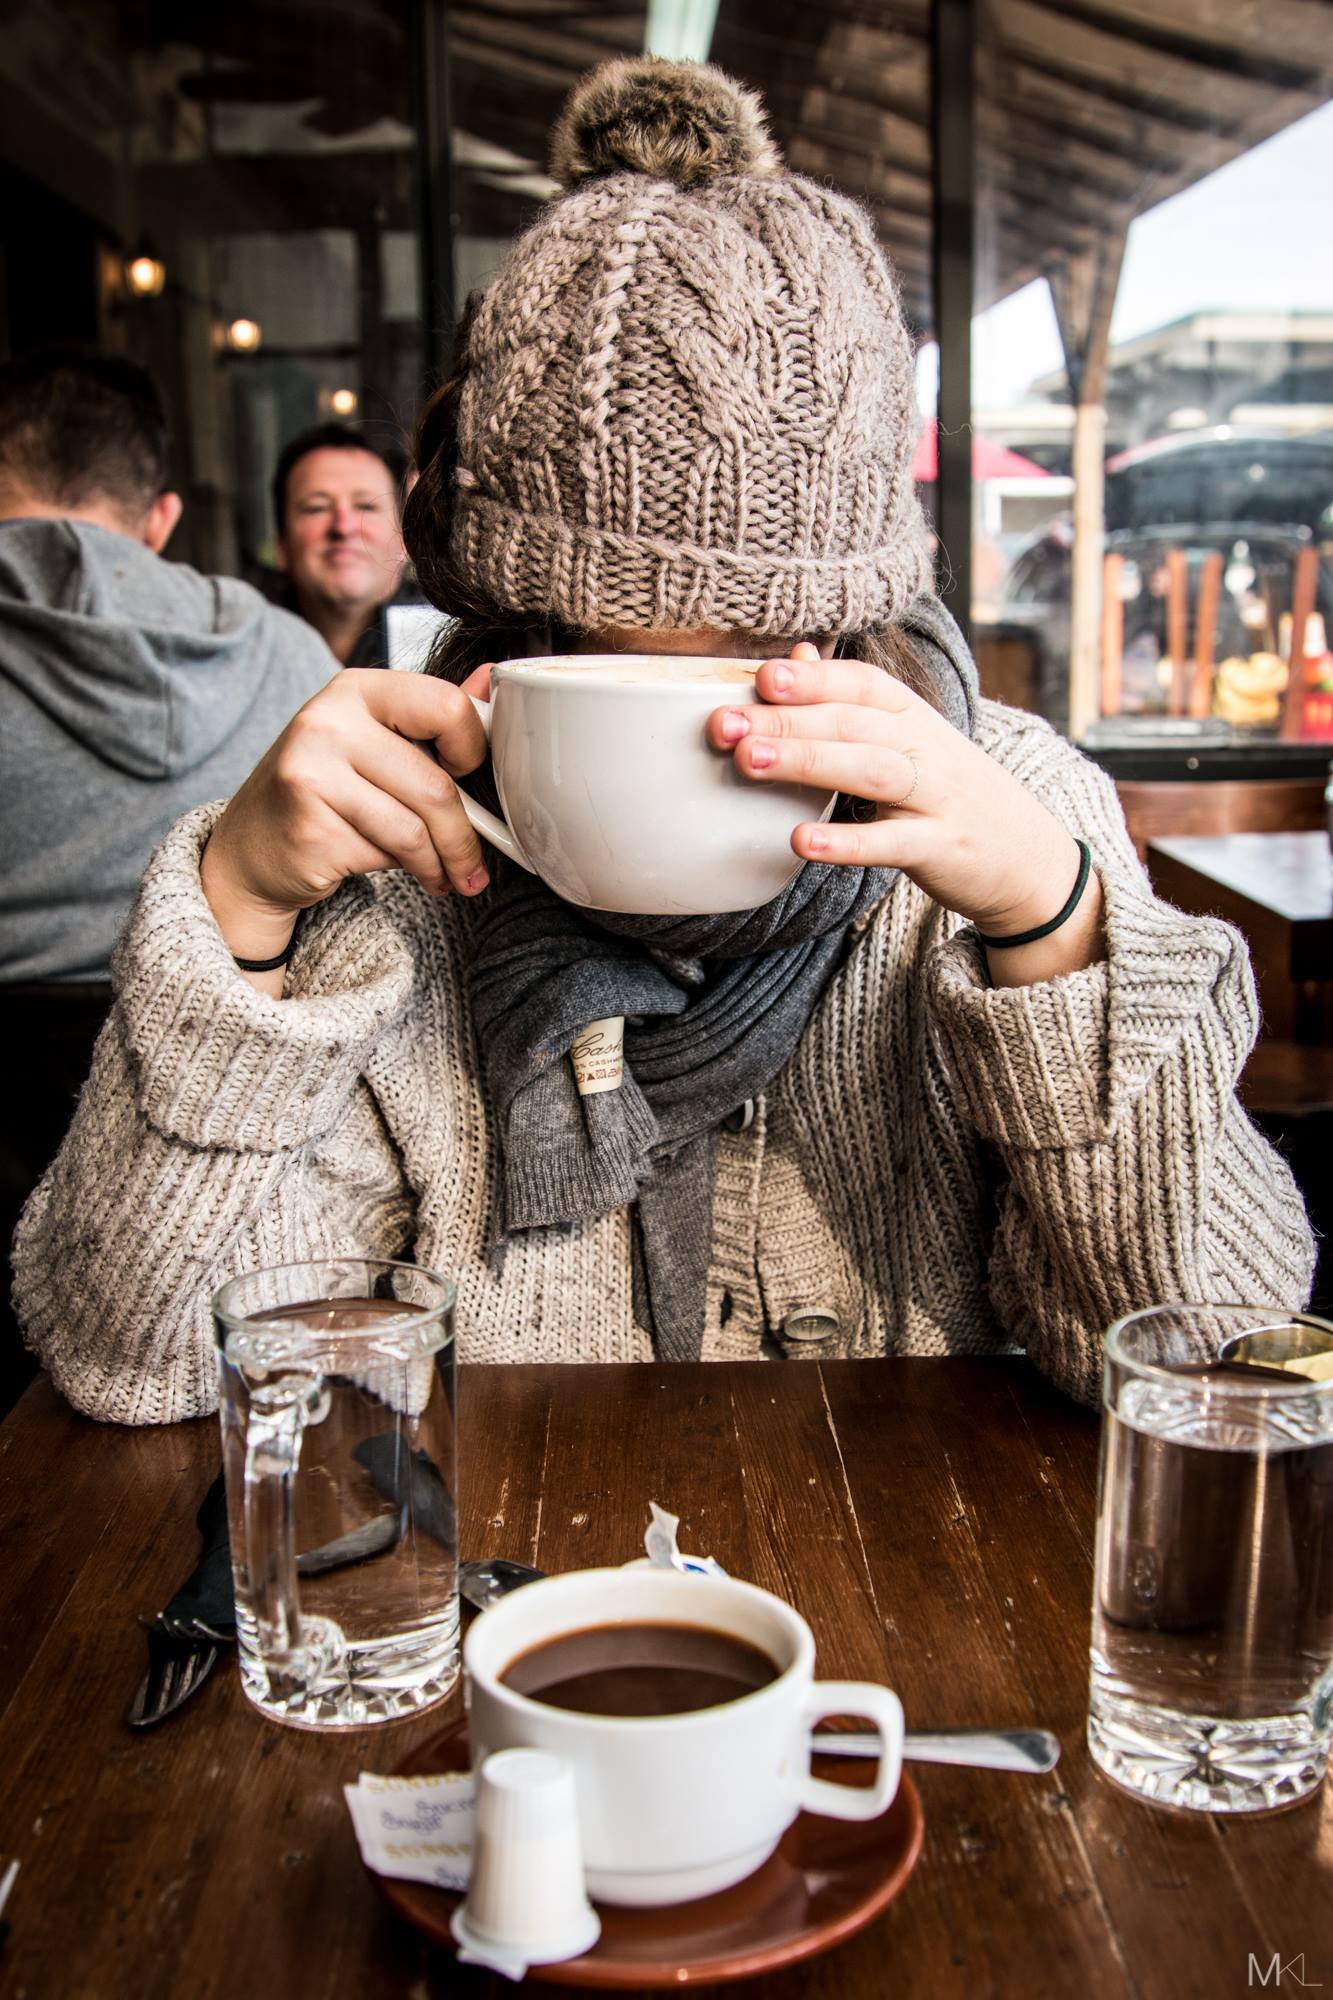 Photographer Snaps Lovable Images Of His Camera-Shy Girlfriend 4